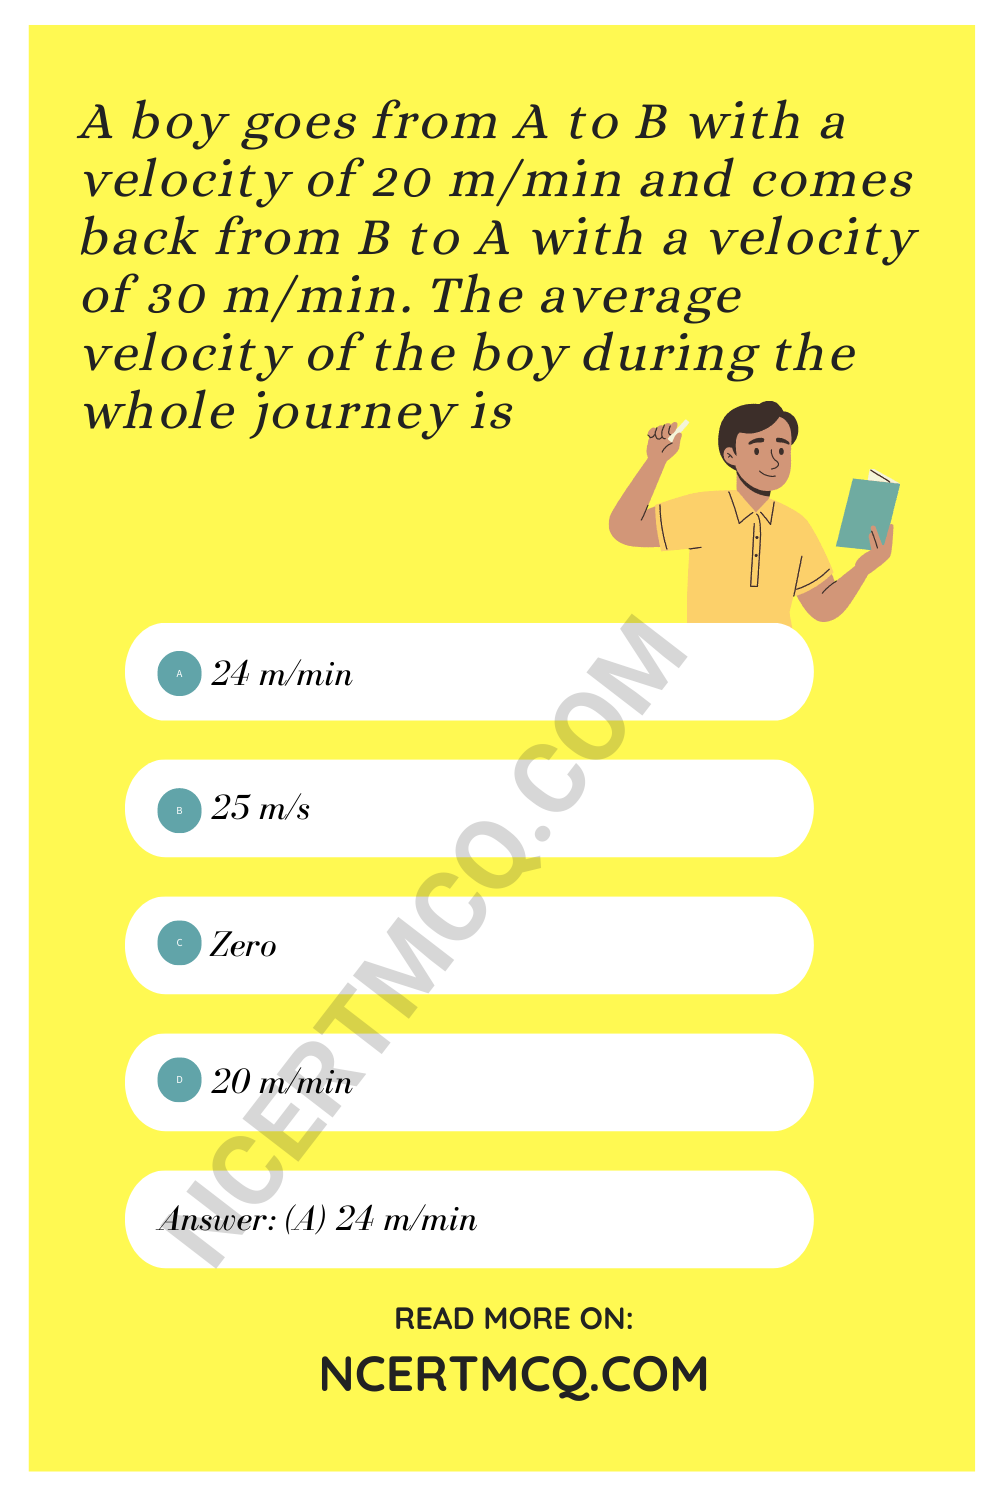 A boy goes from A to B with a velocity of 20 m/min and comes back from B to A with a velocity of 30 m/min. The average velocity of the boy during the whole journey is